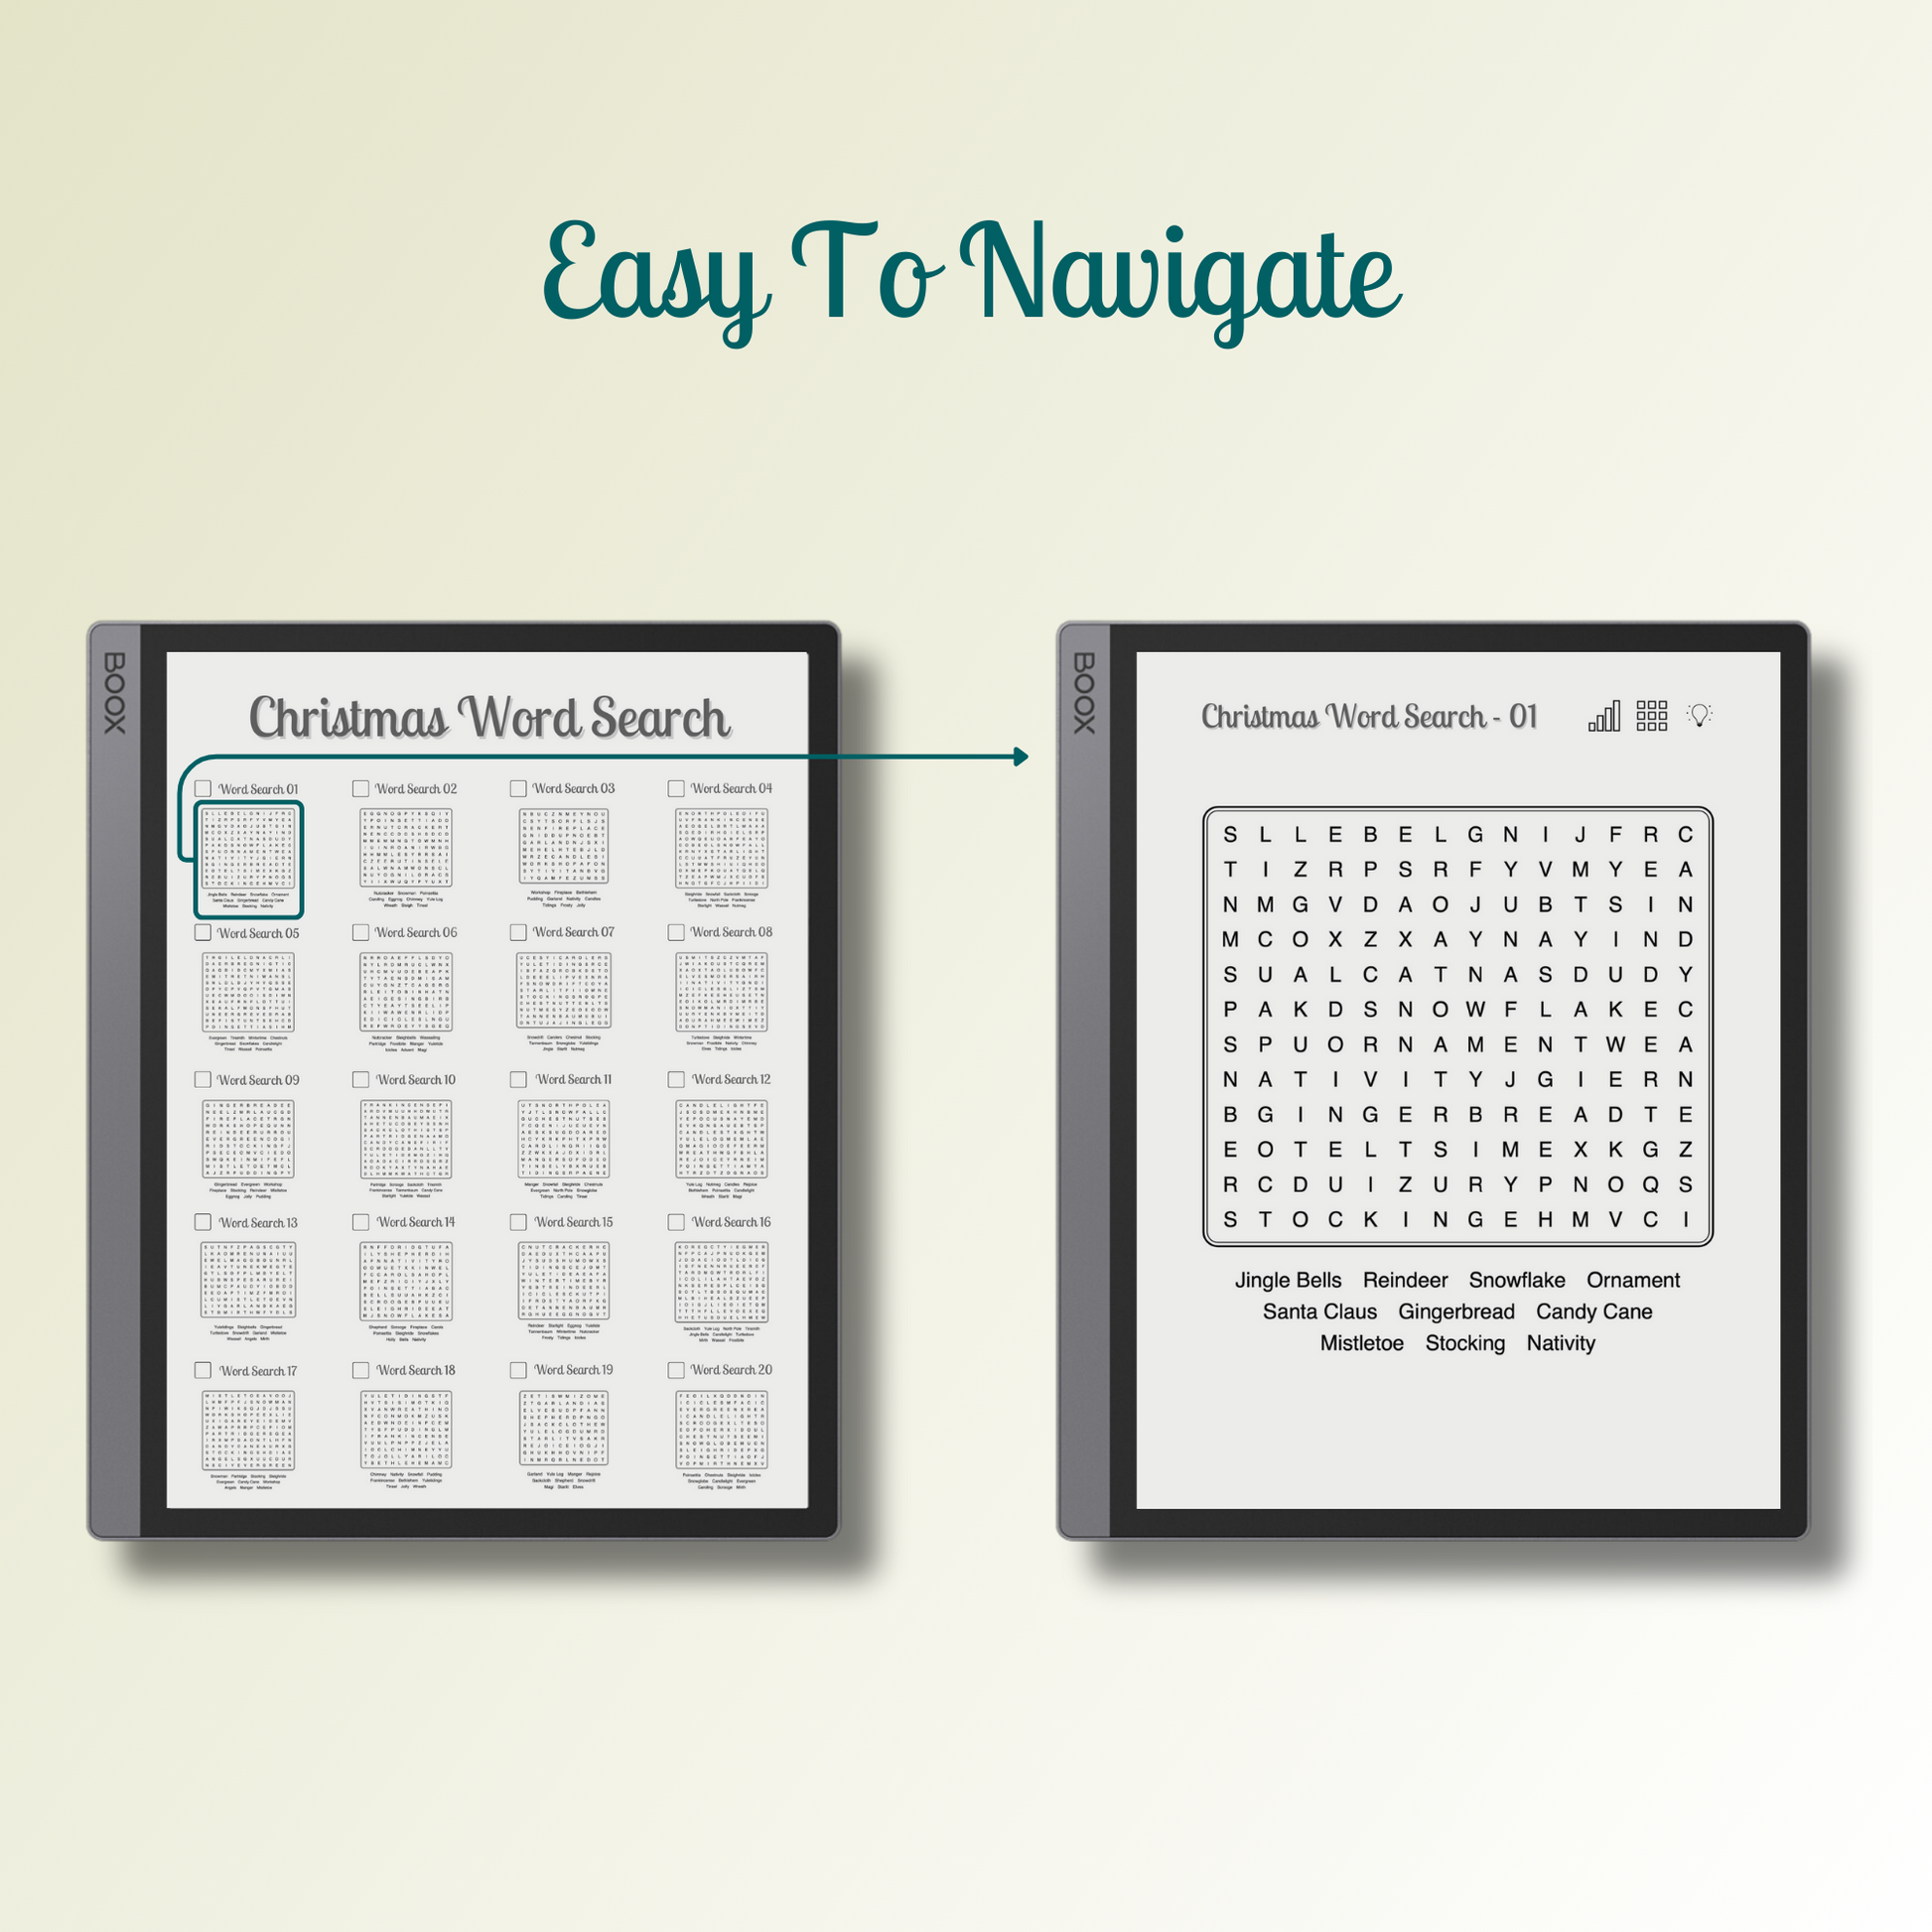 Onyx Boox Christmas Word Search with easy navigations.